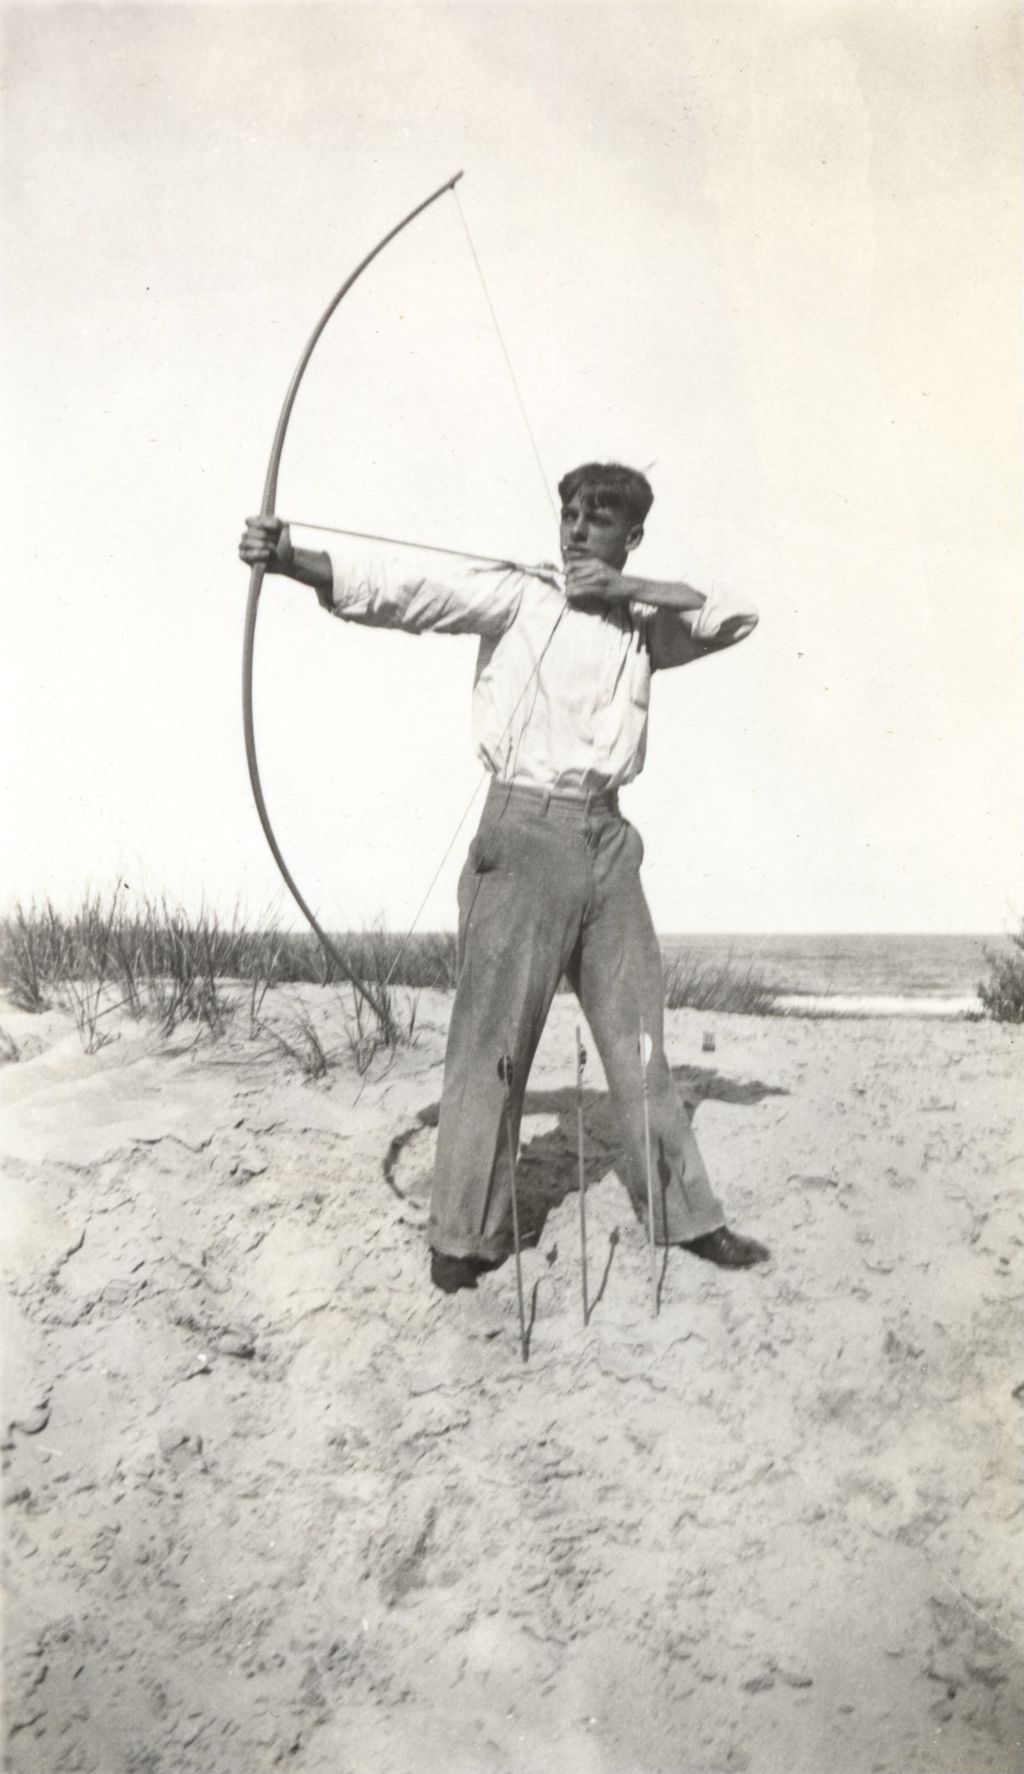 Teenage boy practicing archery on a lakeshore